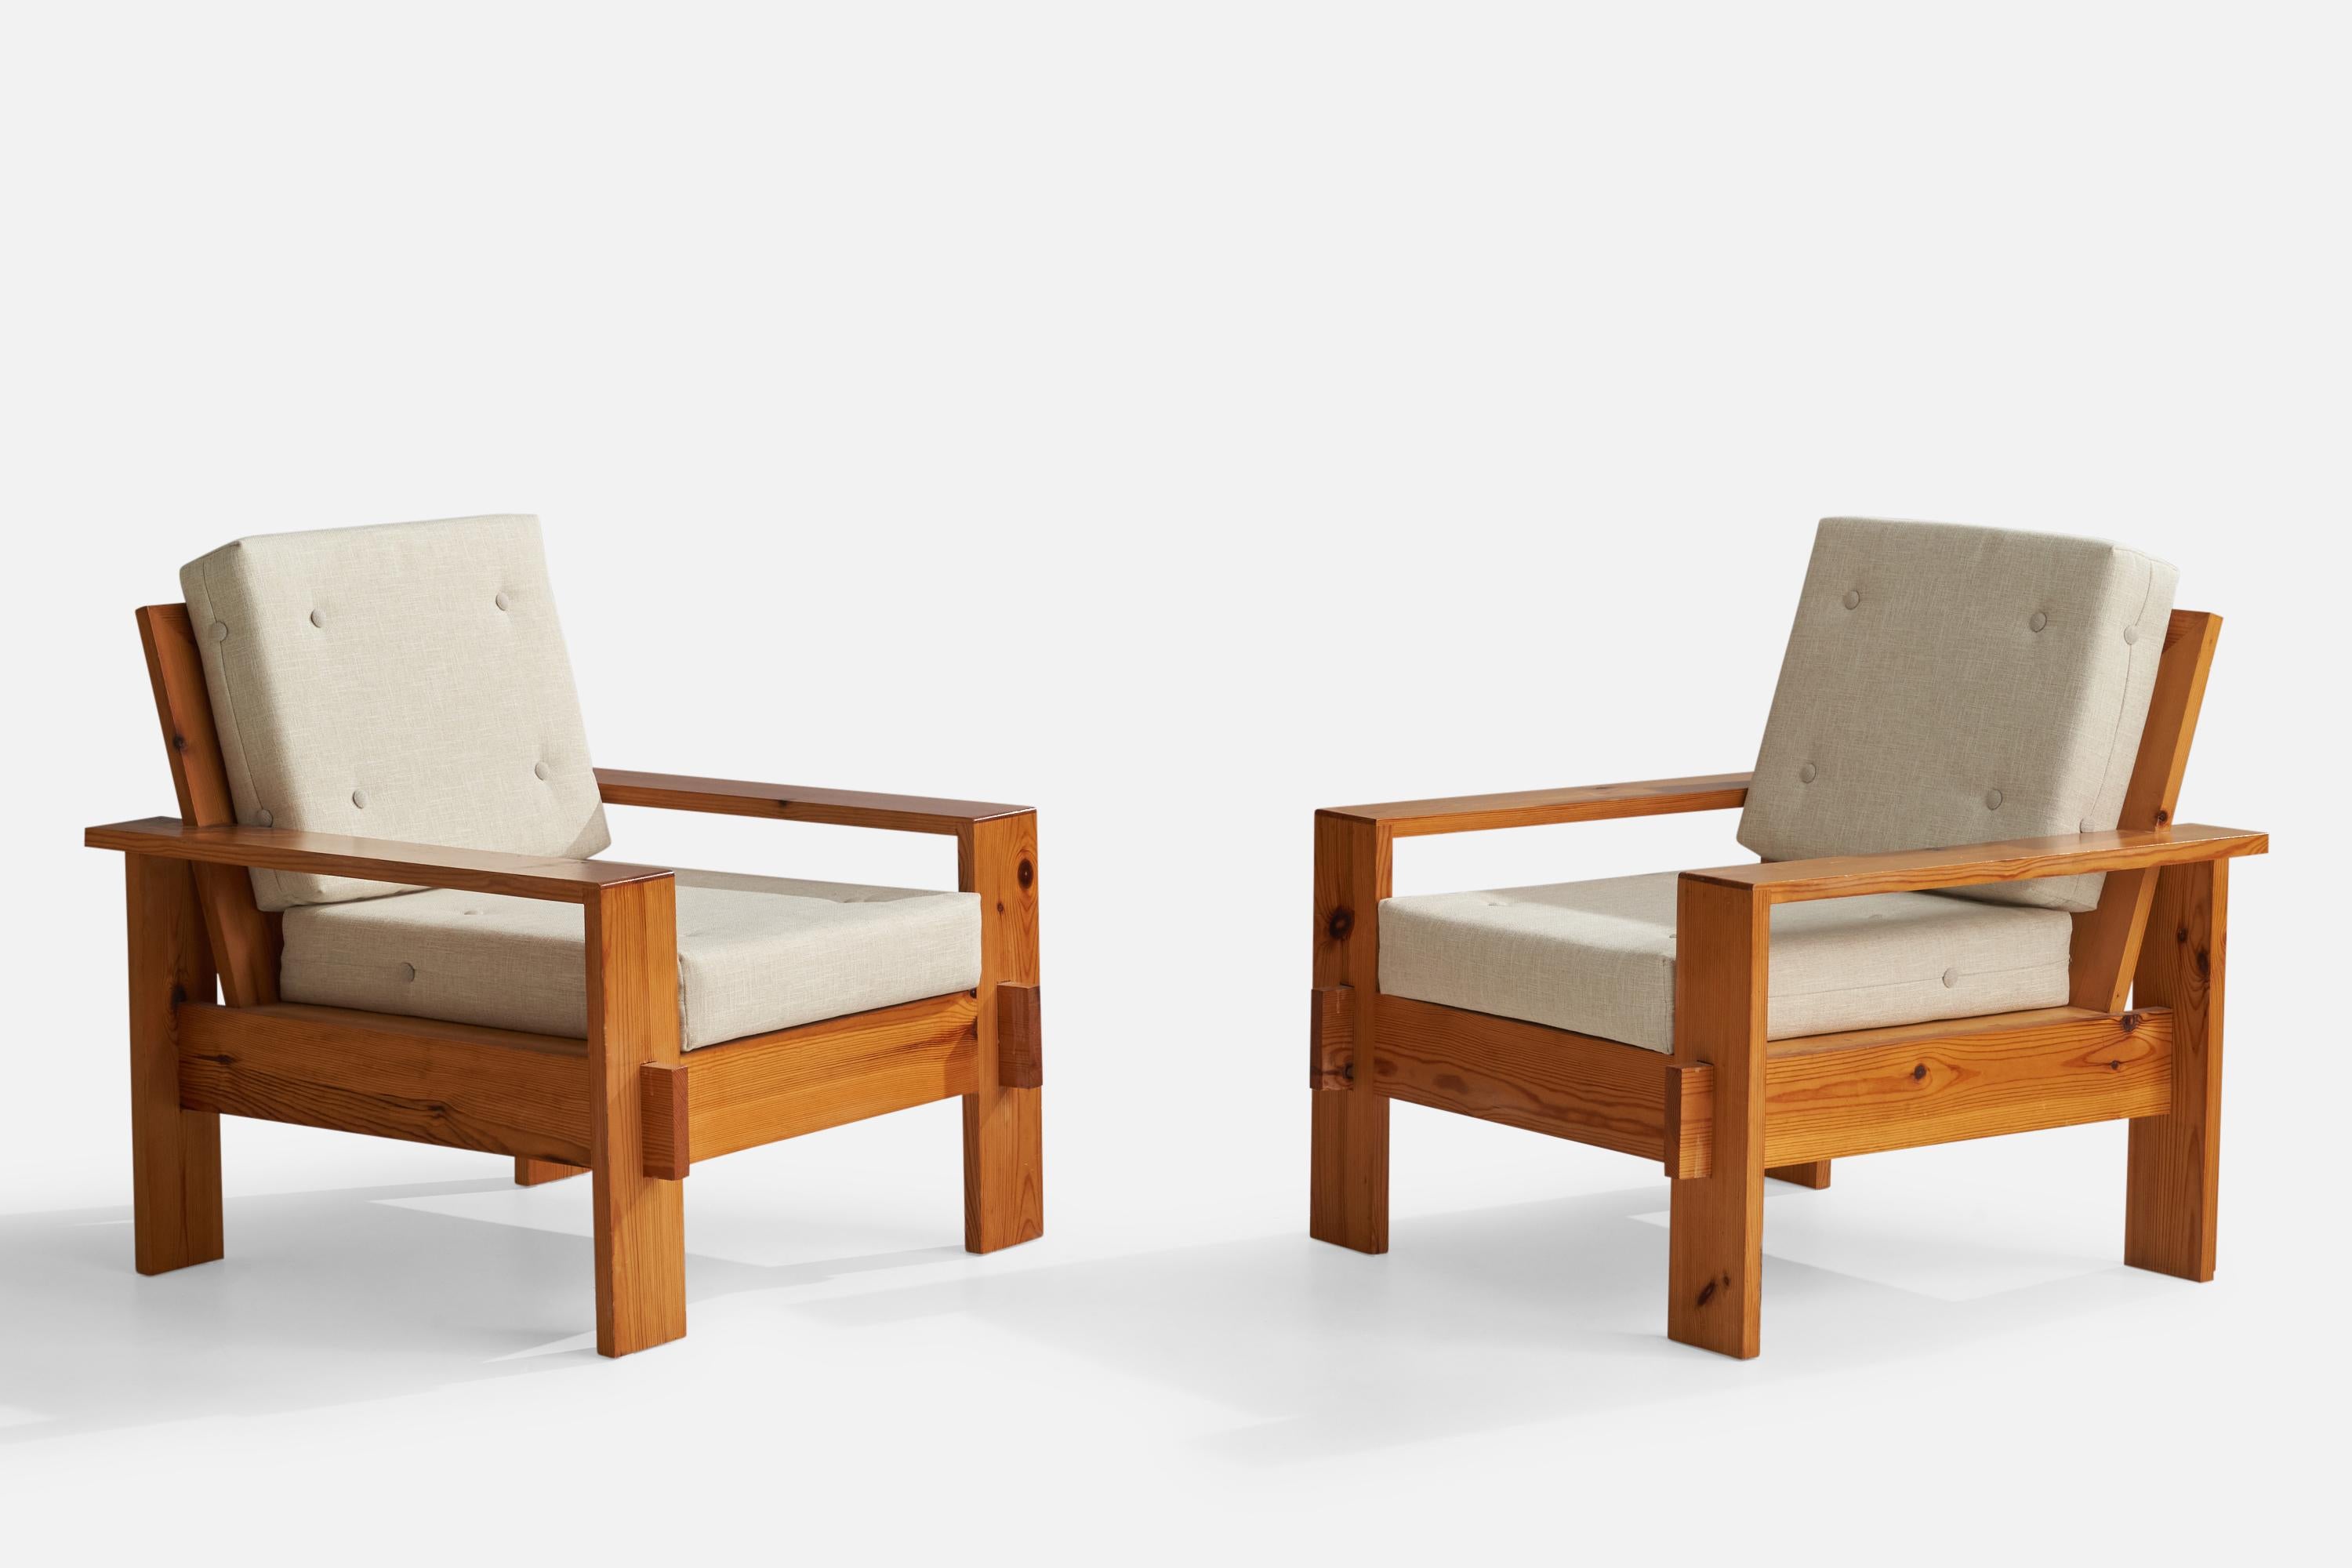 A pair of pine and off-white fabric lounge chairs designed and produced in Finland, 1970s.

Seat height 16”